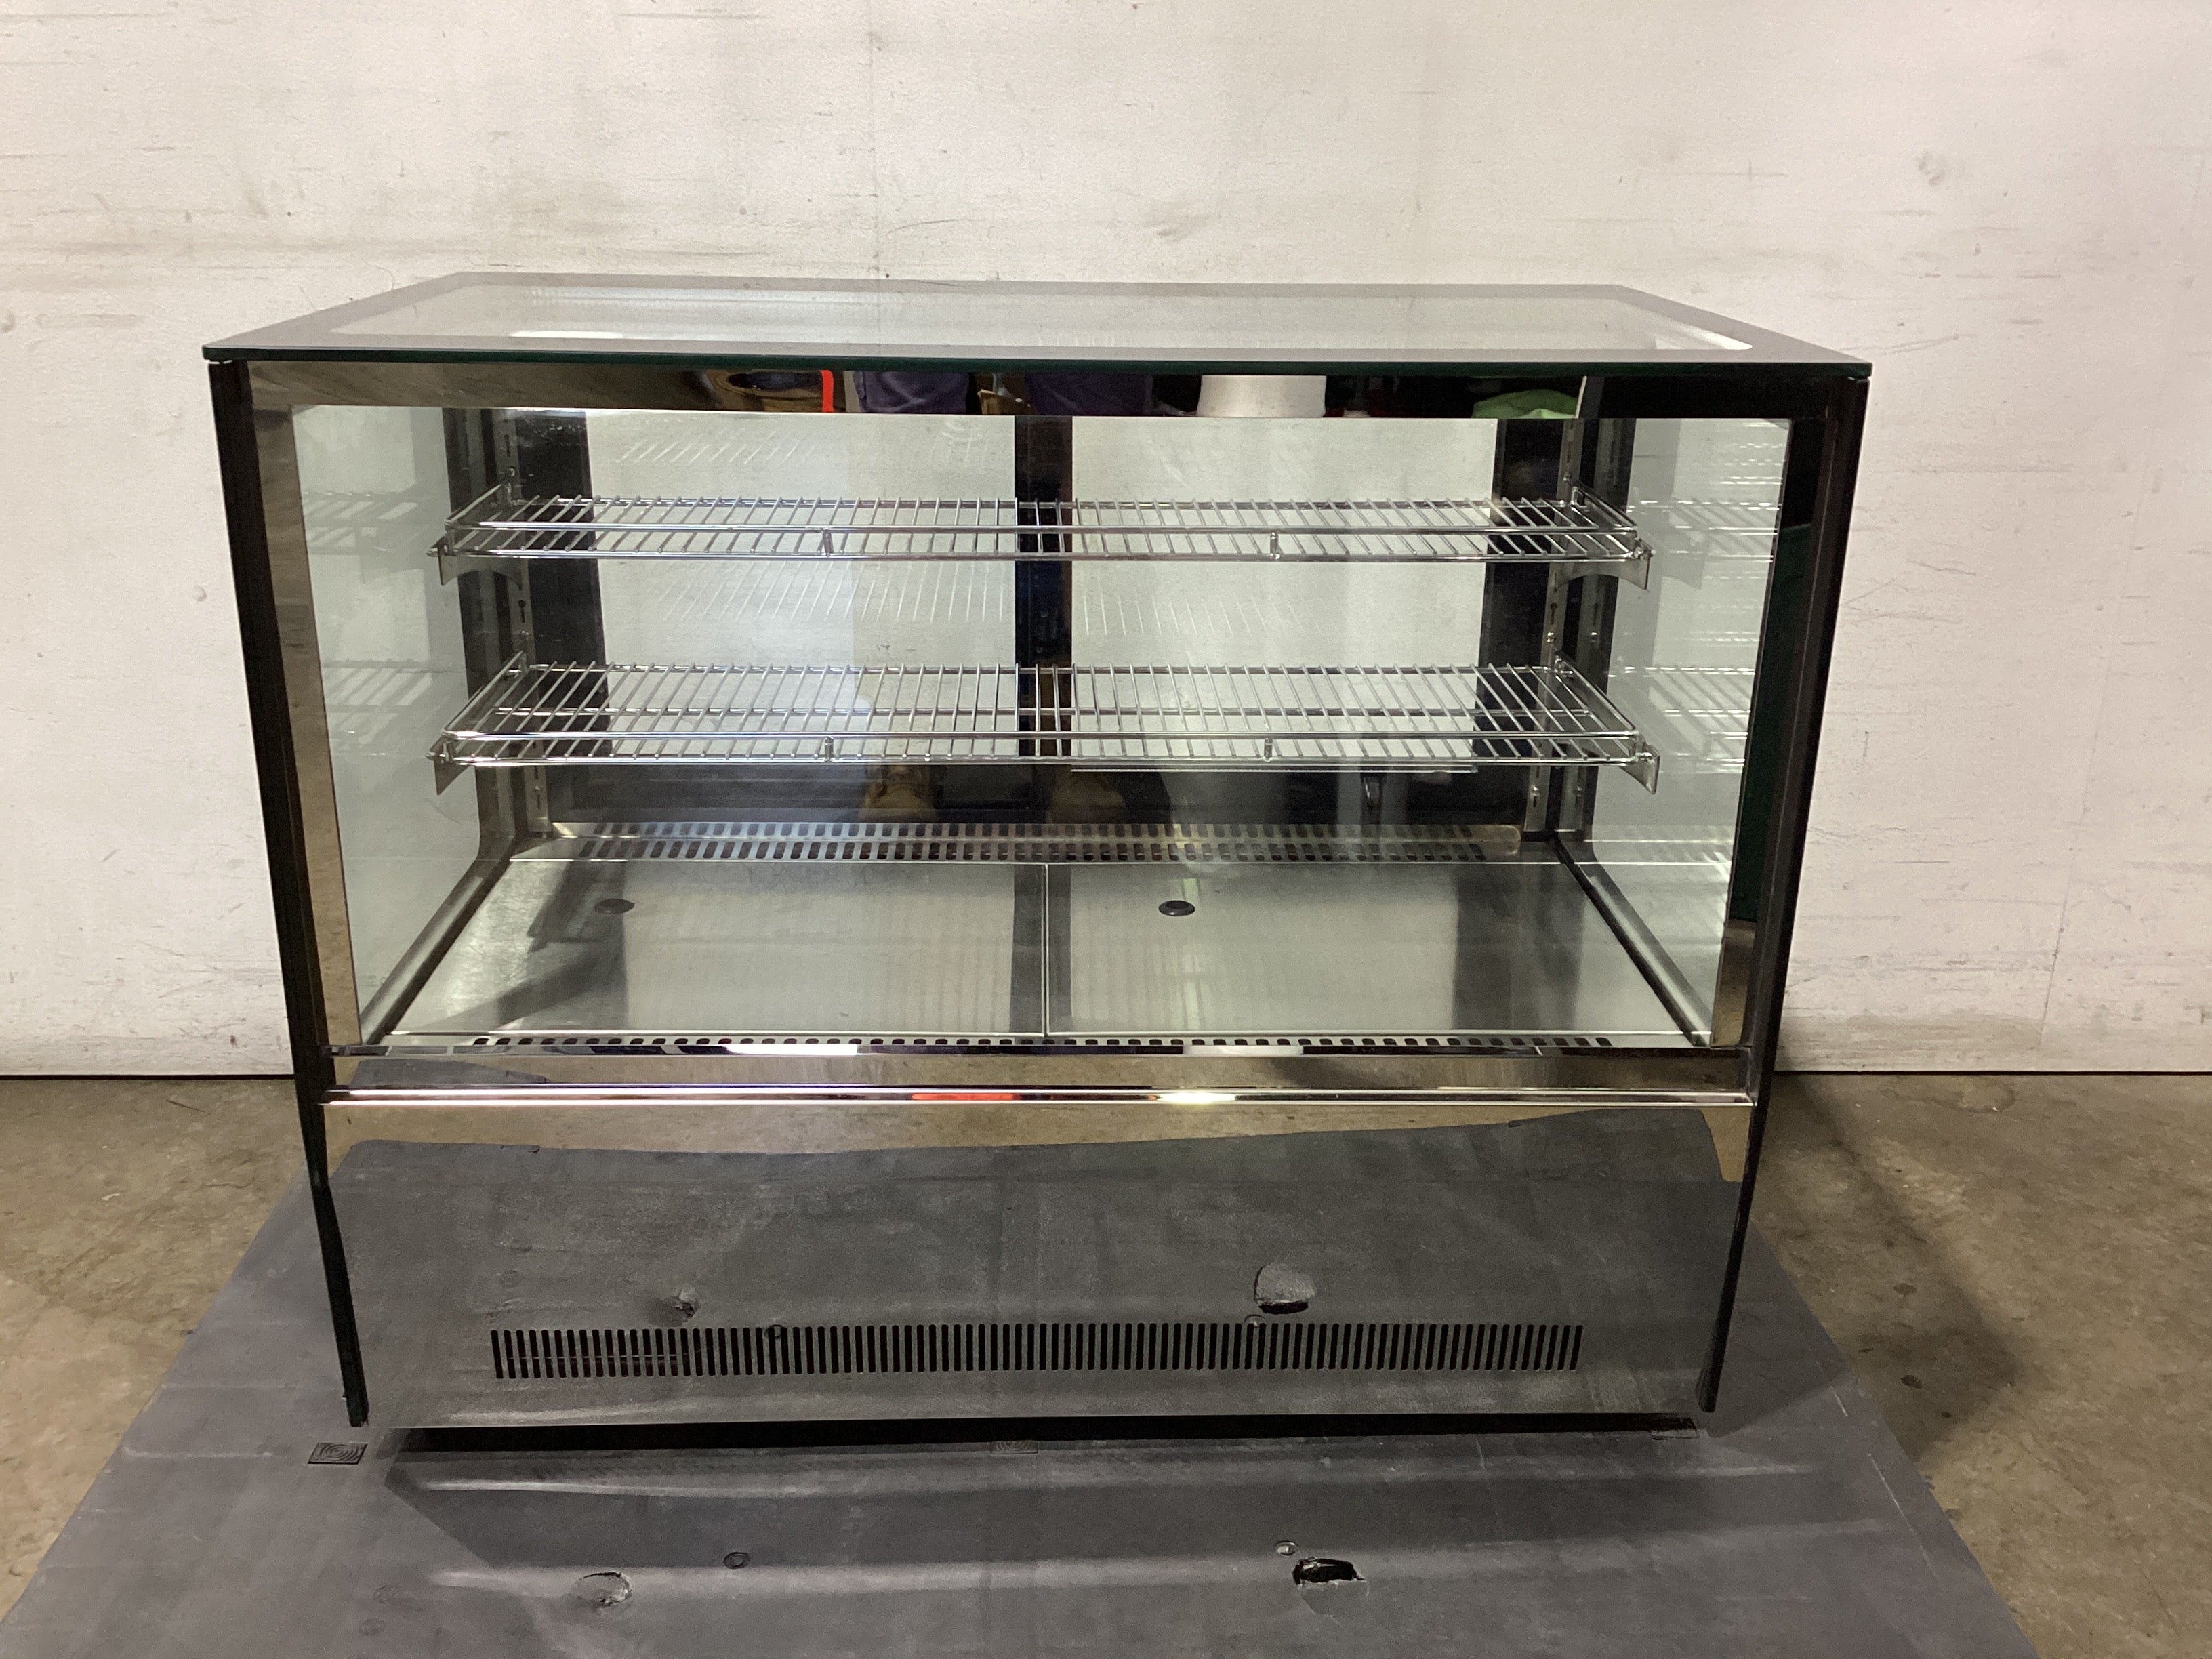 Thumbnail - FED GN-900RT Cold Food Display